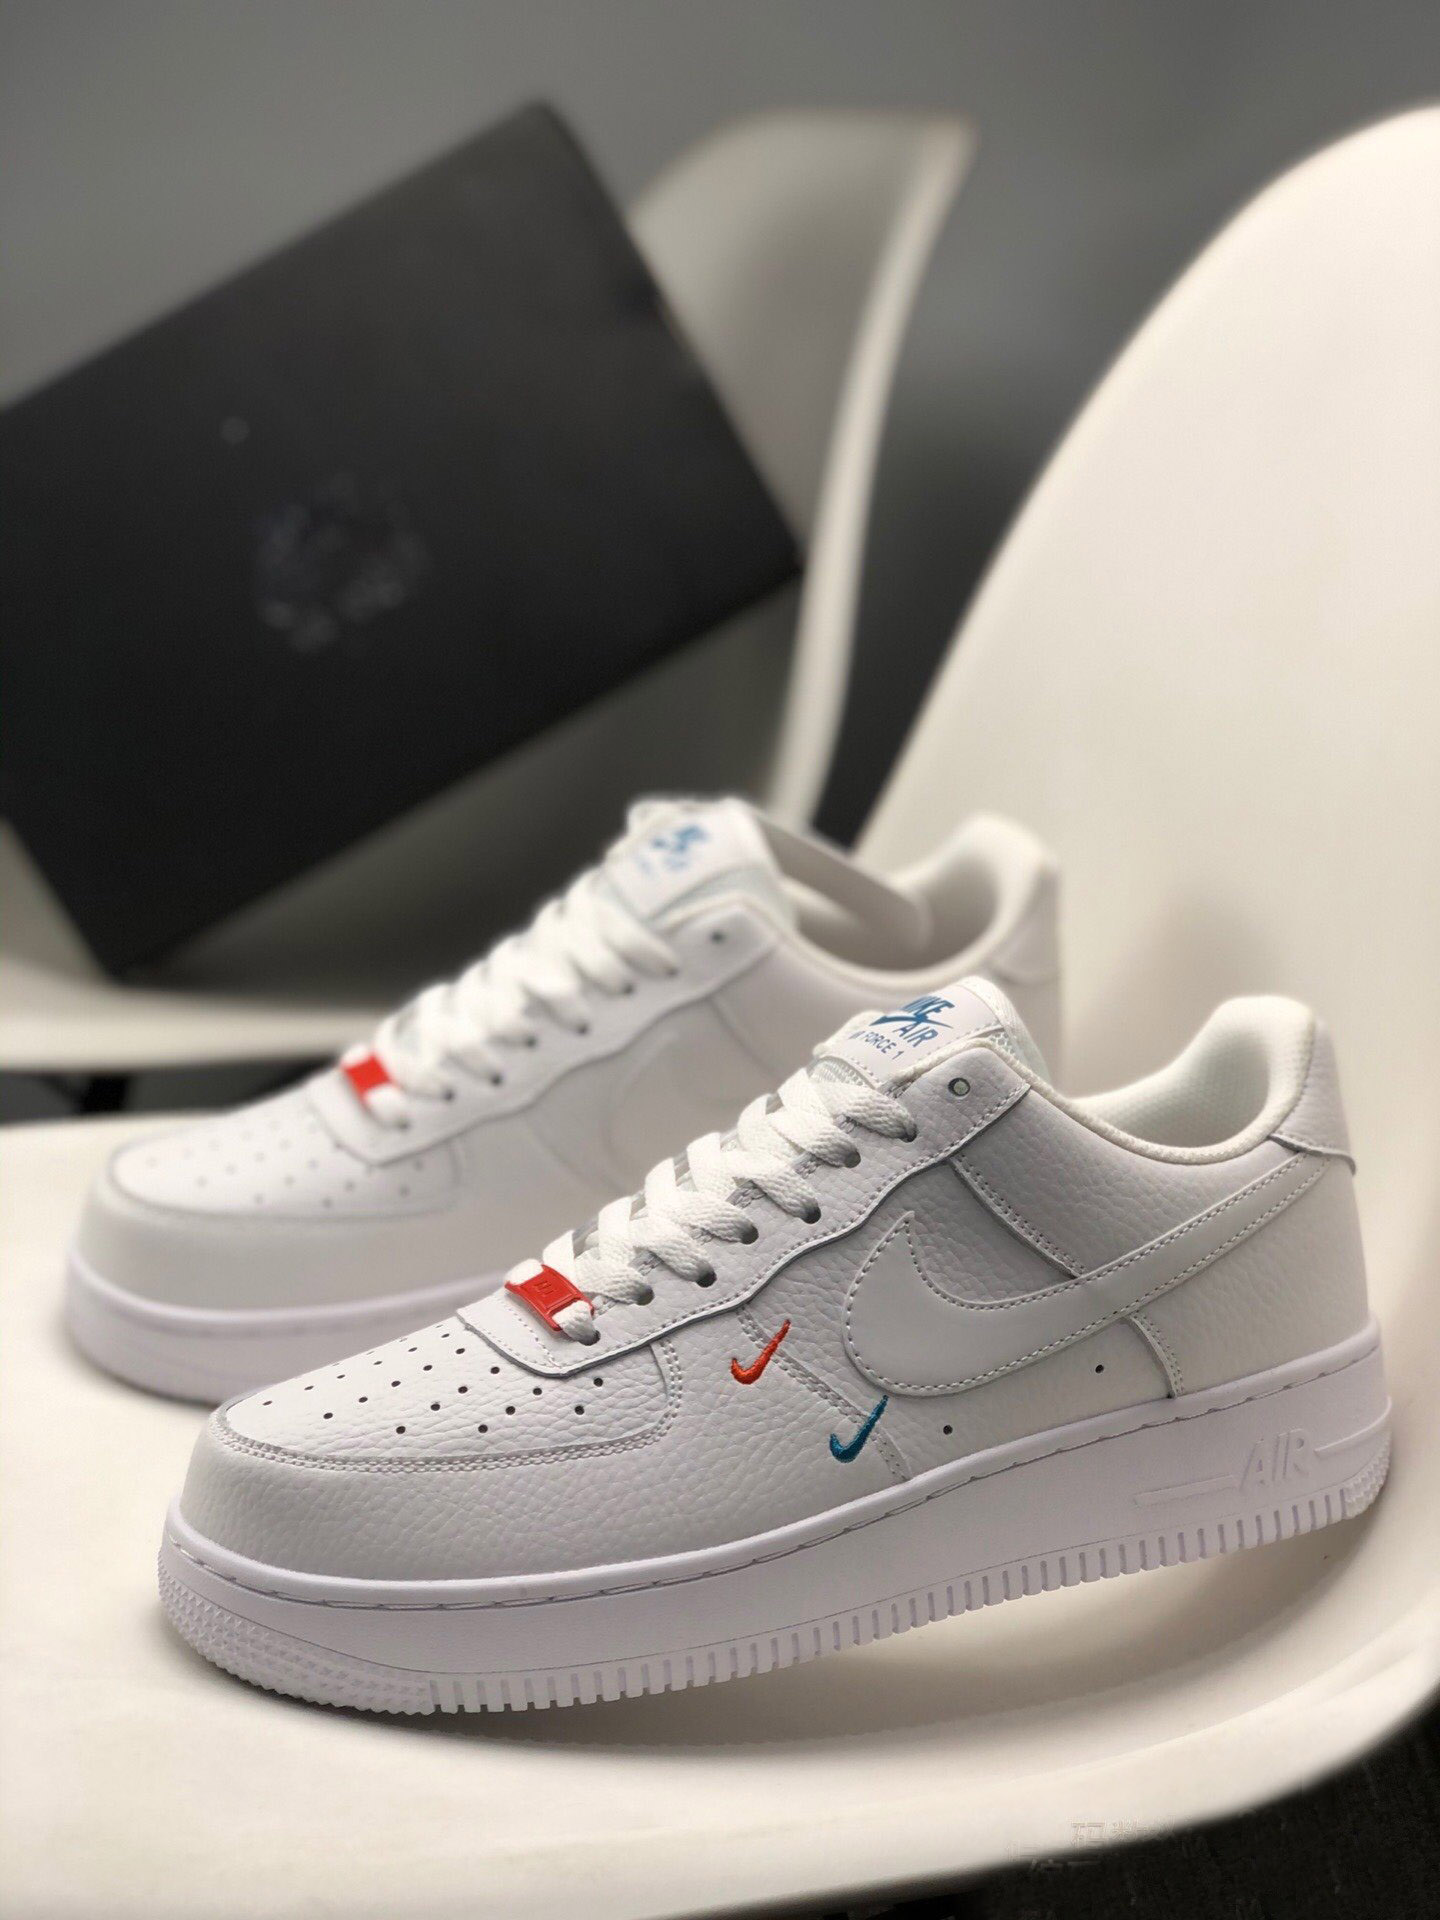 Nike Air Force 1 White/Solar Red CT1989-101 For Sale – Sneaker Hello